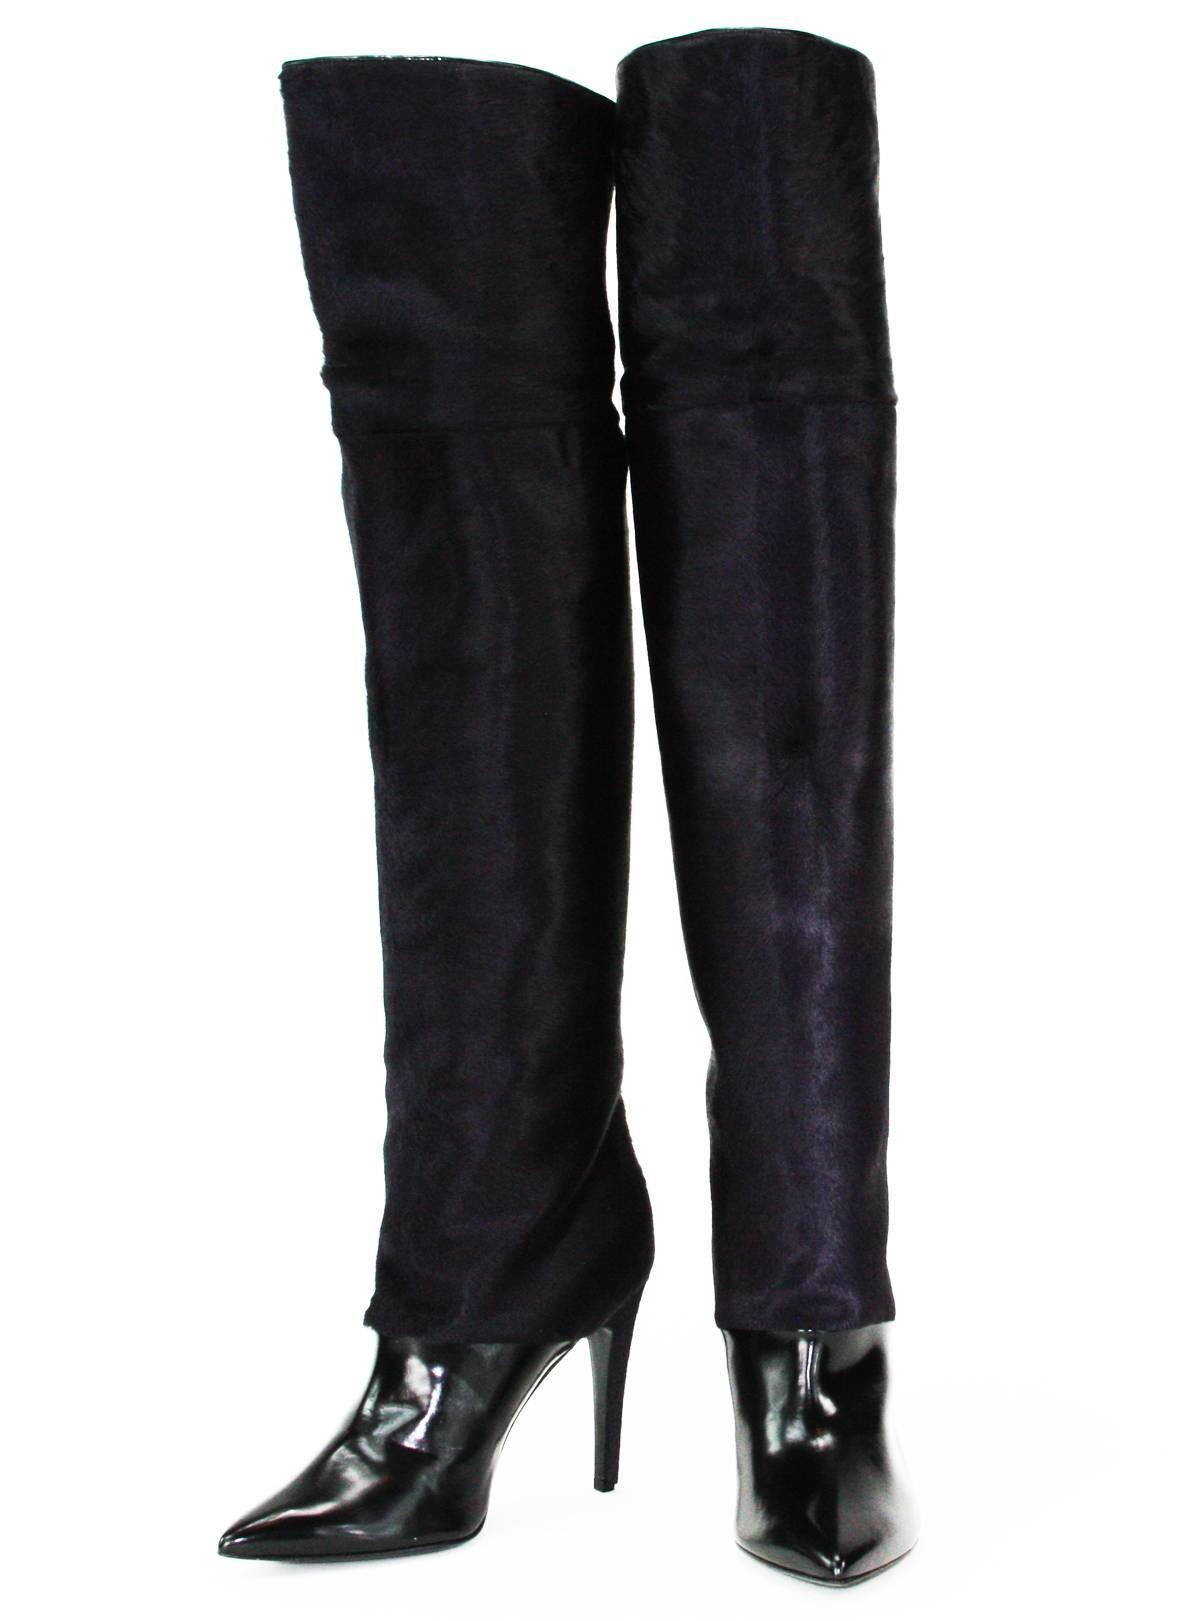 New PIERRE HARDY Over the Knee Combo Boots
Italian Size 39.5 - US 9
Color - Black Leather, Dark Purple Fur
Leather and  Pony-Hair
Pointed Toe
Leather Lining and Sole
Covered Pony-Hair Heel - 4 inches ( 10 CM )
Pull On Style
Made in Italy
Retail